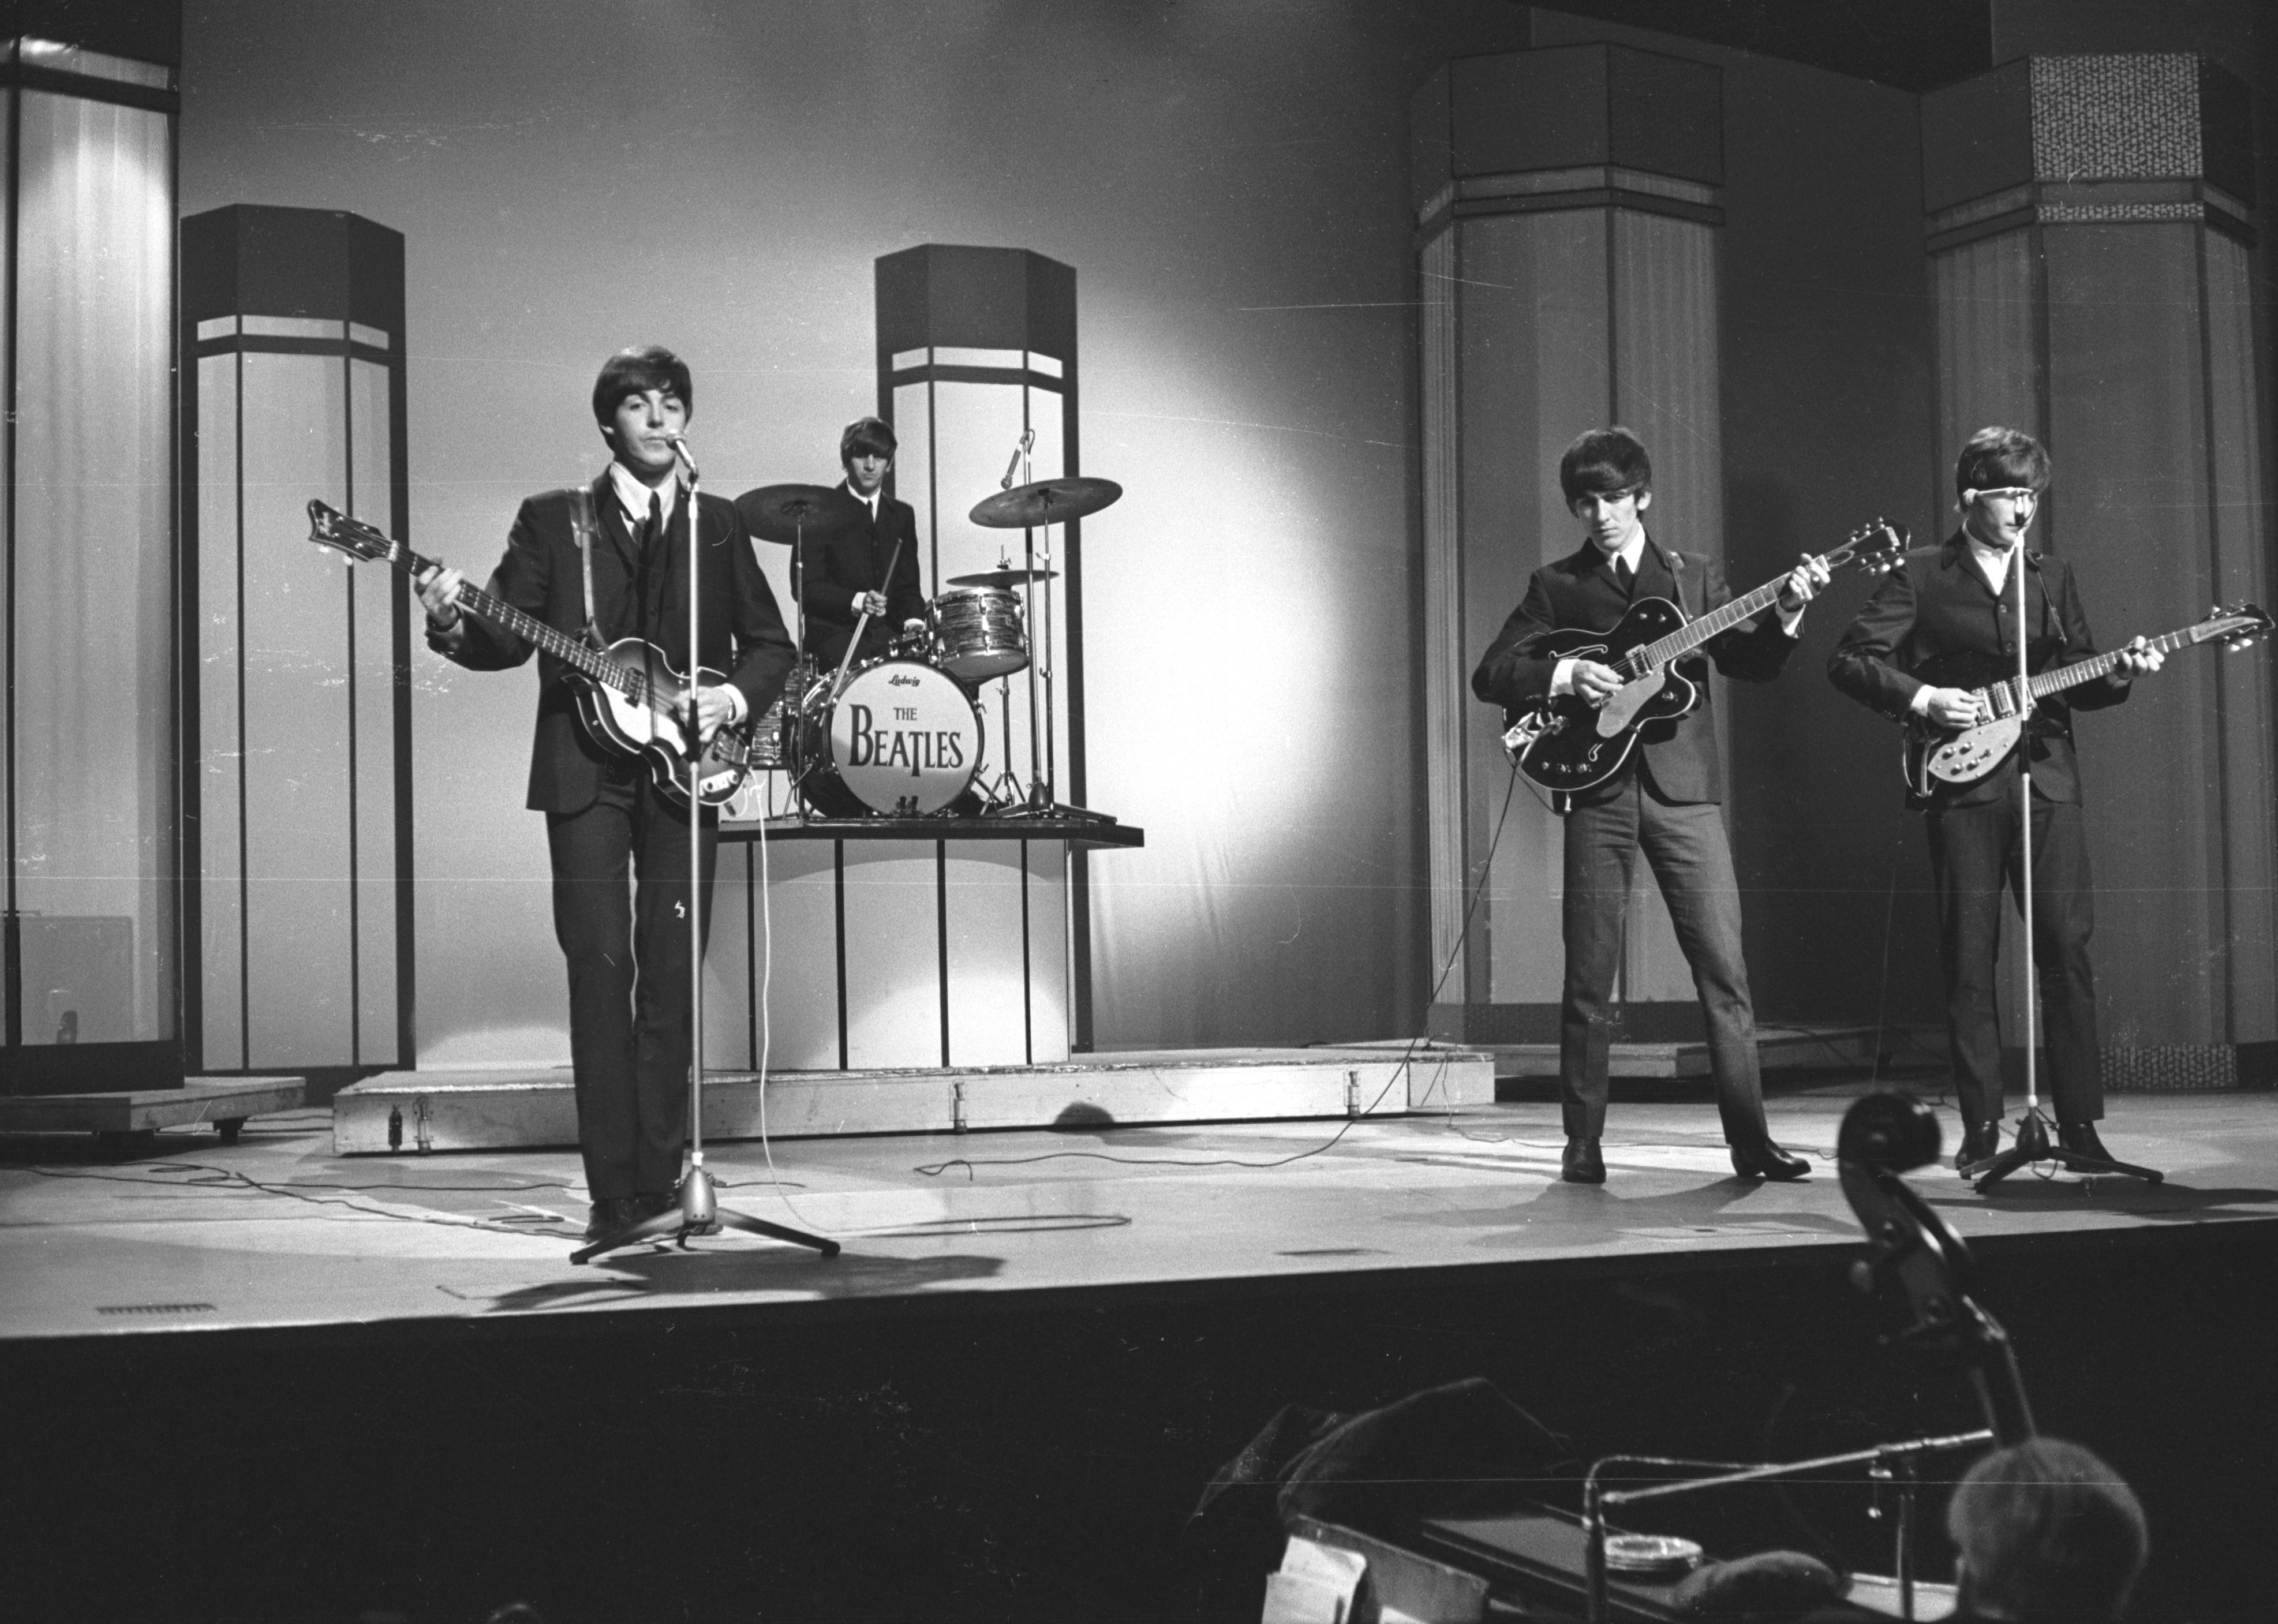 The Beatles in concert at the London Palladium. 